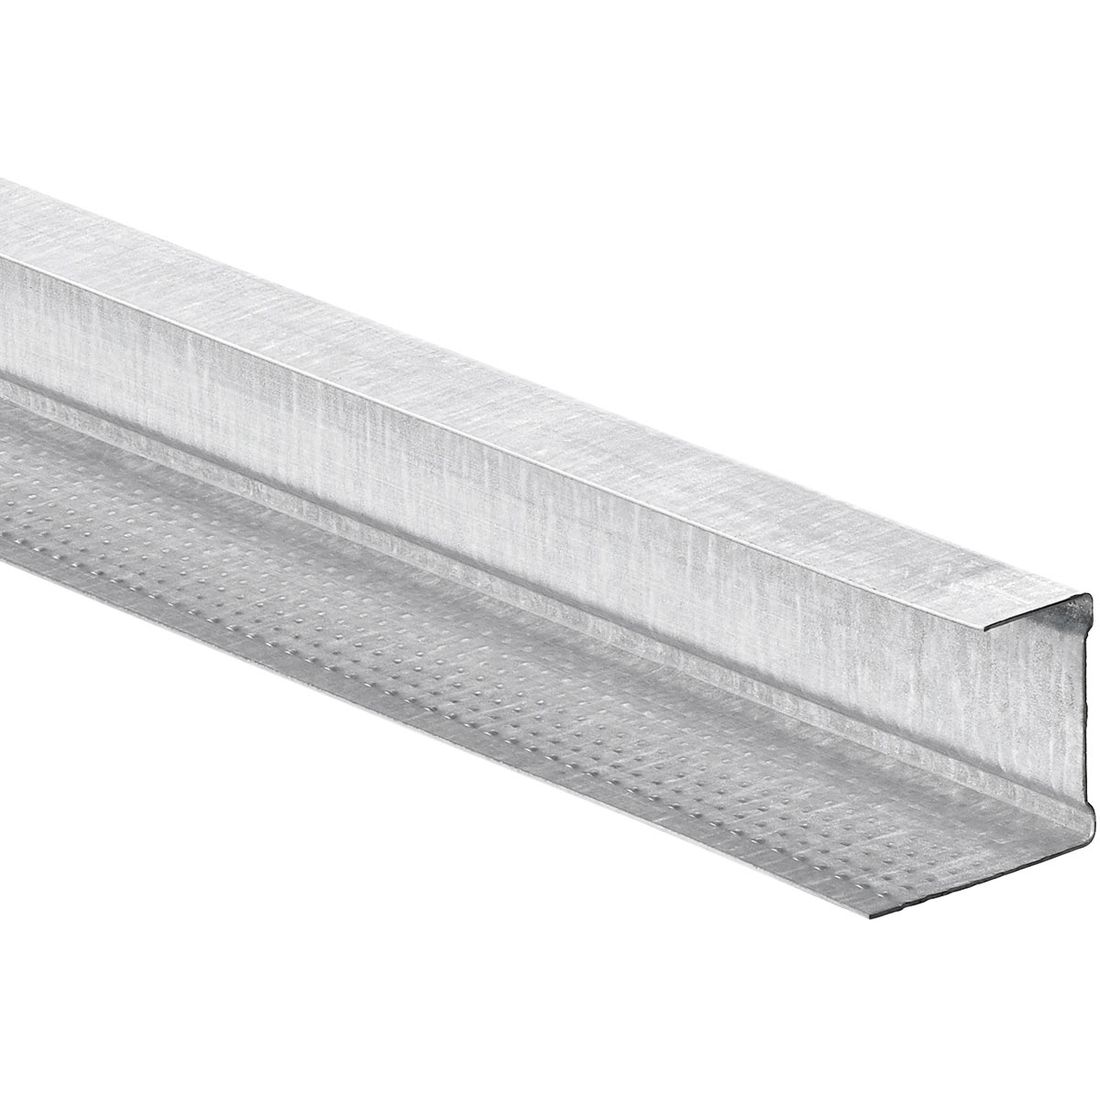 Gtec Edge Channel Mfce26 3.6M Ceiling System